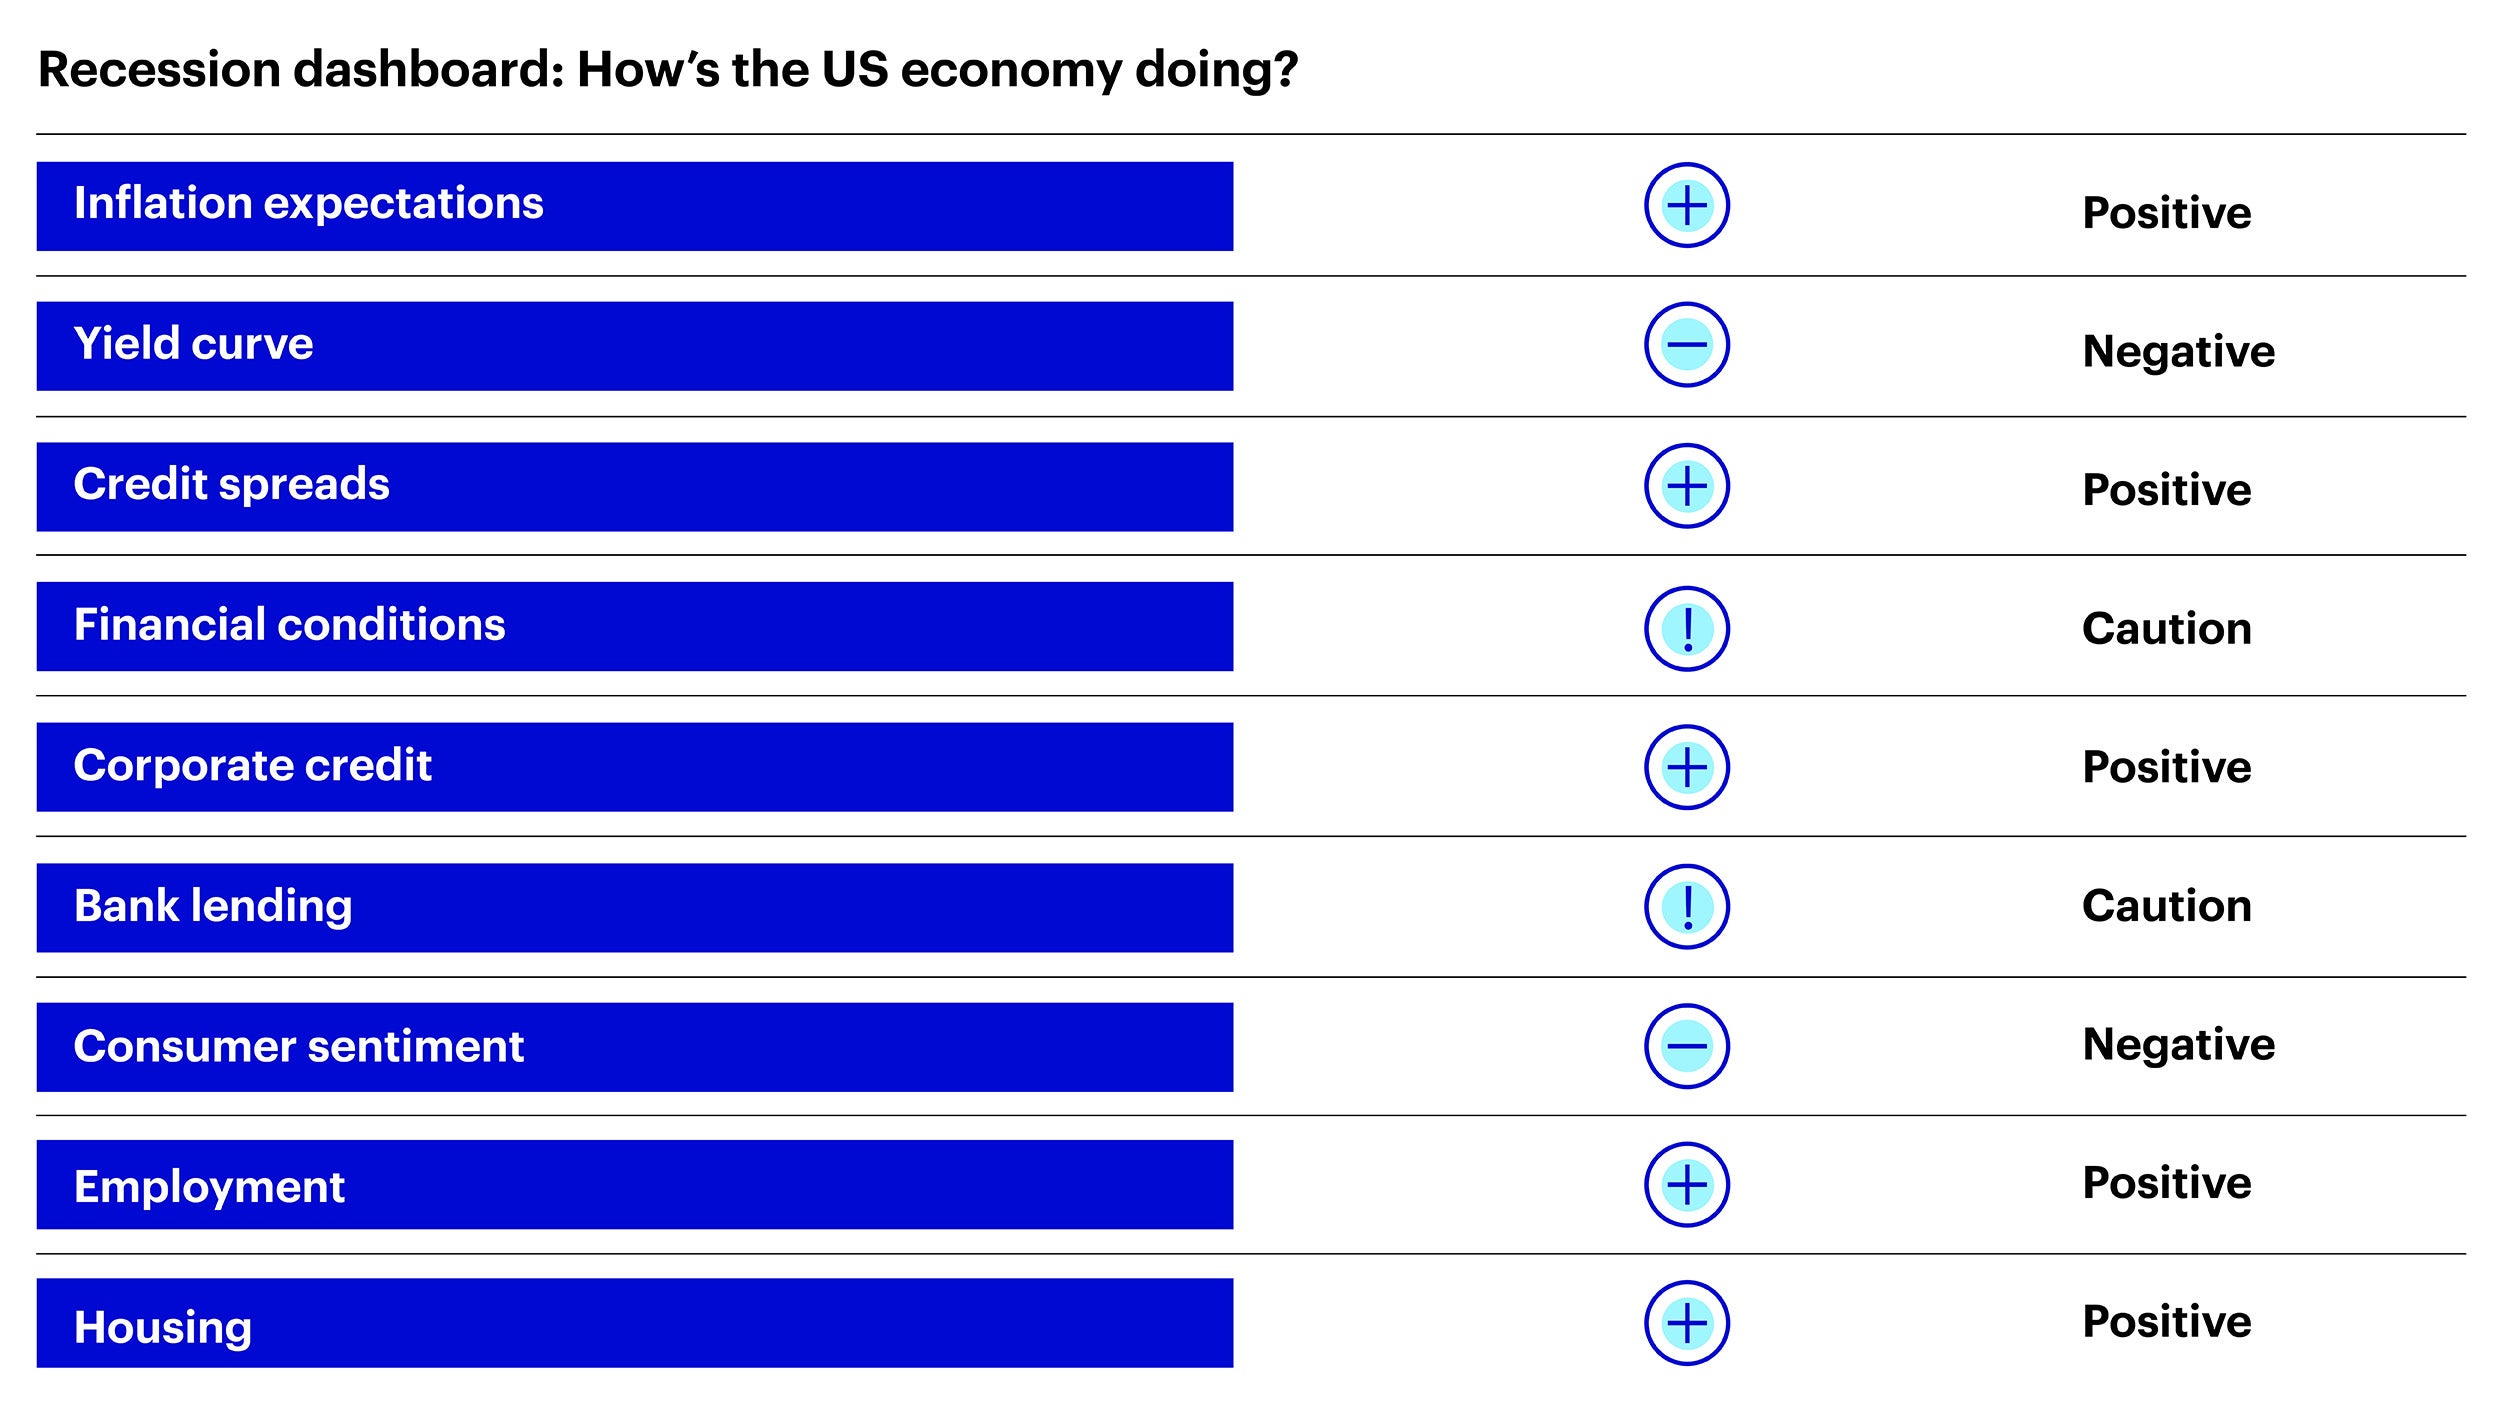 Recession dashboard showing how the US is doing in eight key areas.